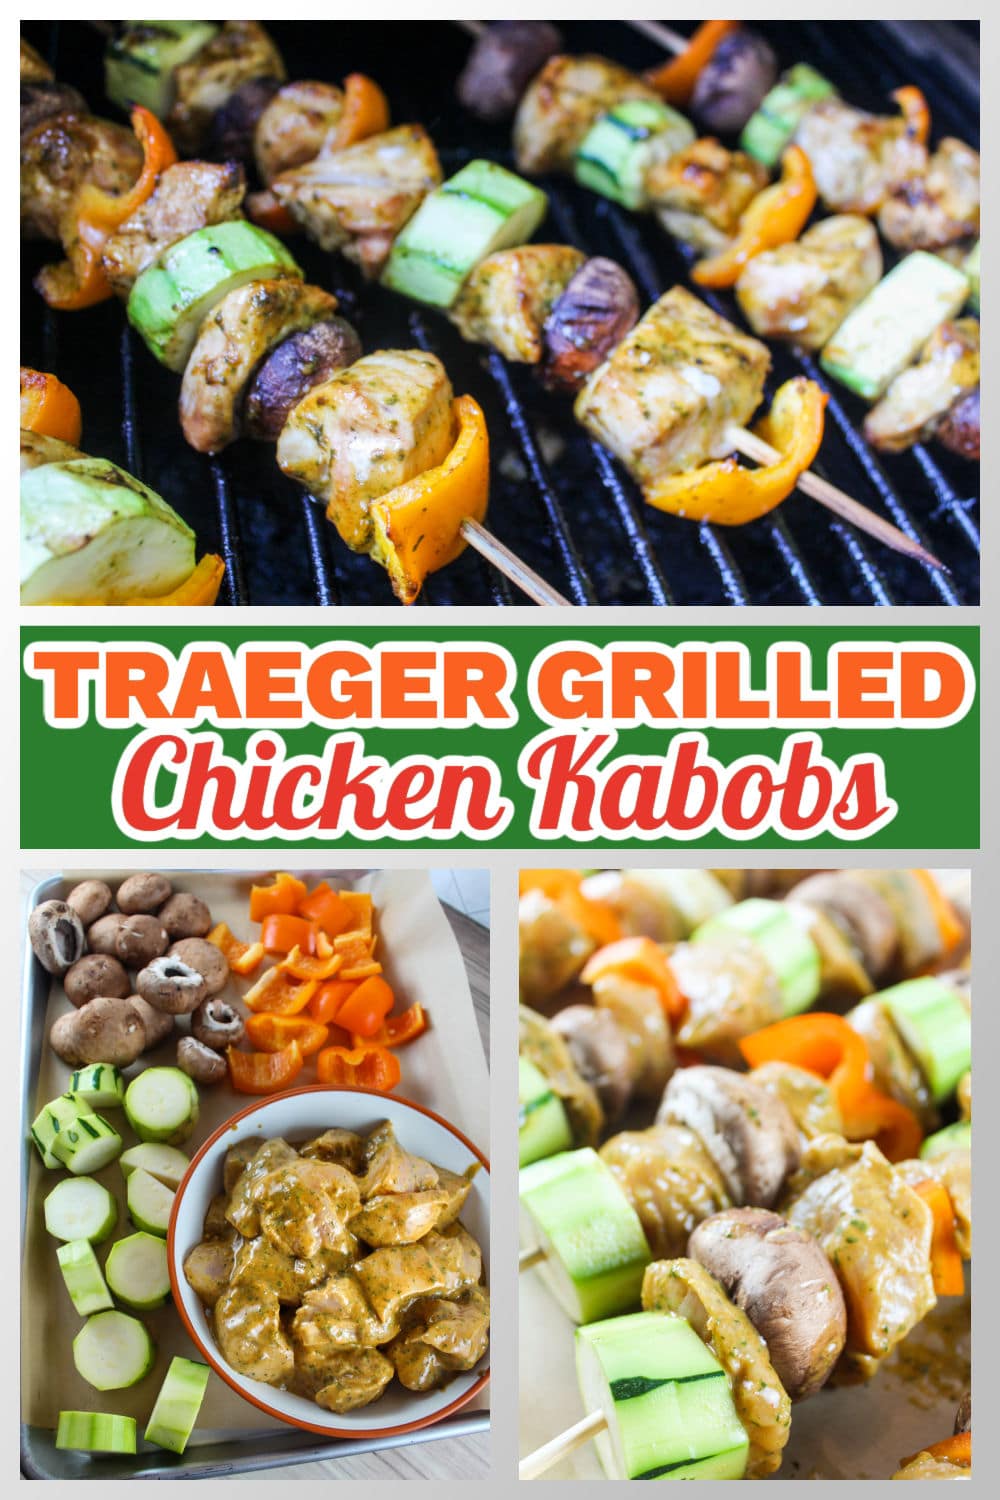 Grilled Chicken Kabobs on the Traeger are now my favorite dinner! Marinate them the night before and you'll have dinner on the table in 15 minutes. Juicy with just a little spiciness - and loaded with veggies! Served over rice, these kabobs are the perfect dinner!  via @foodhussy